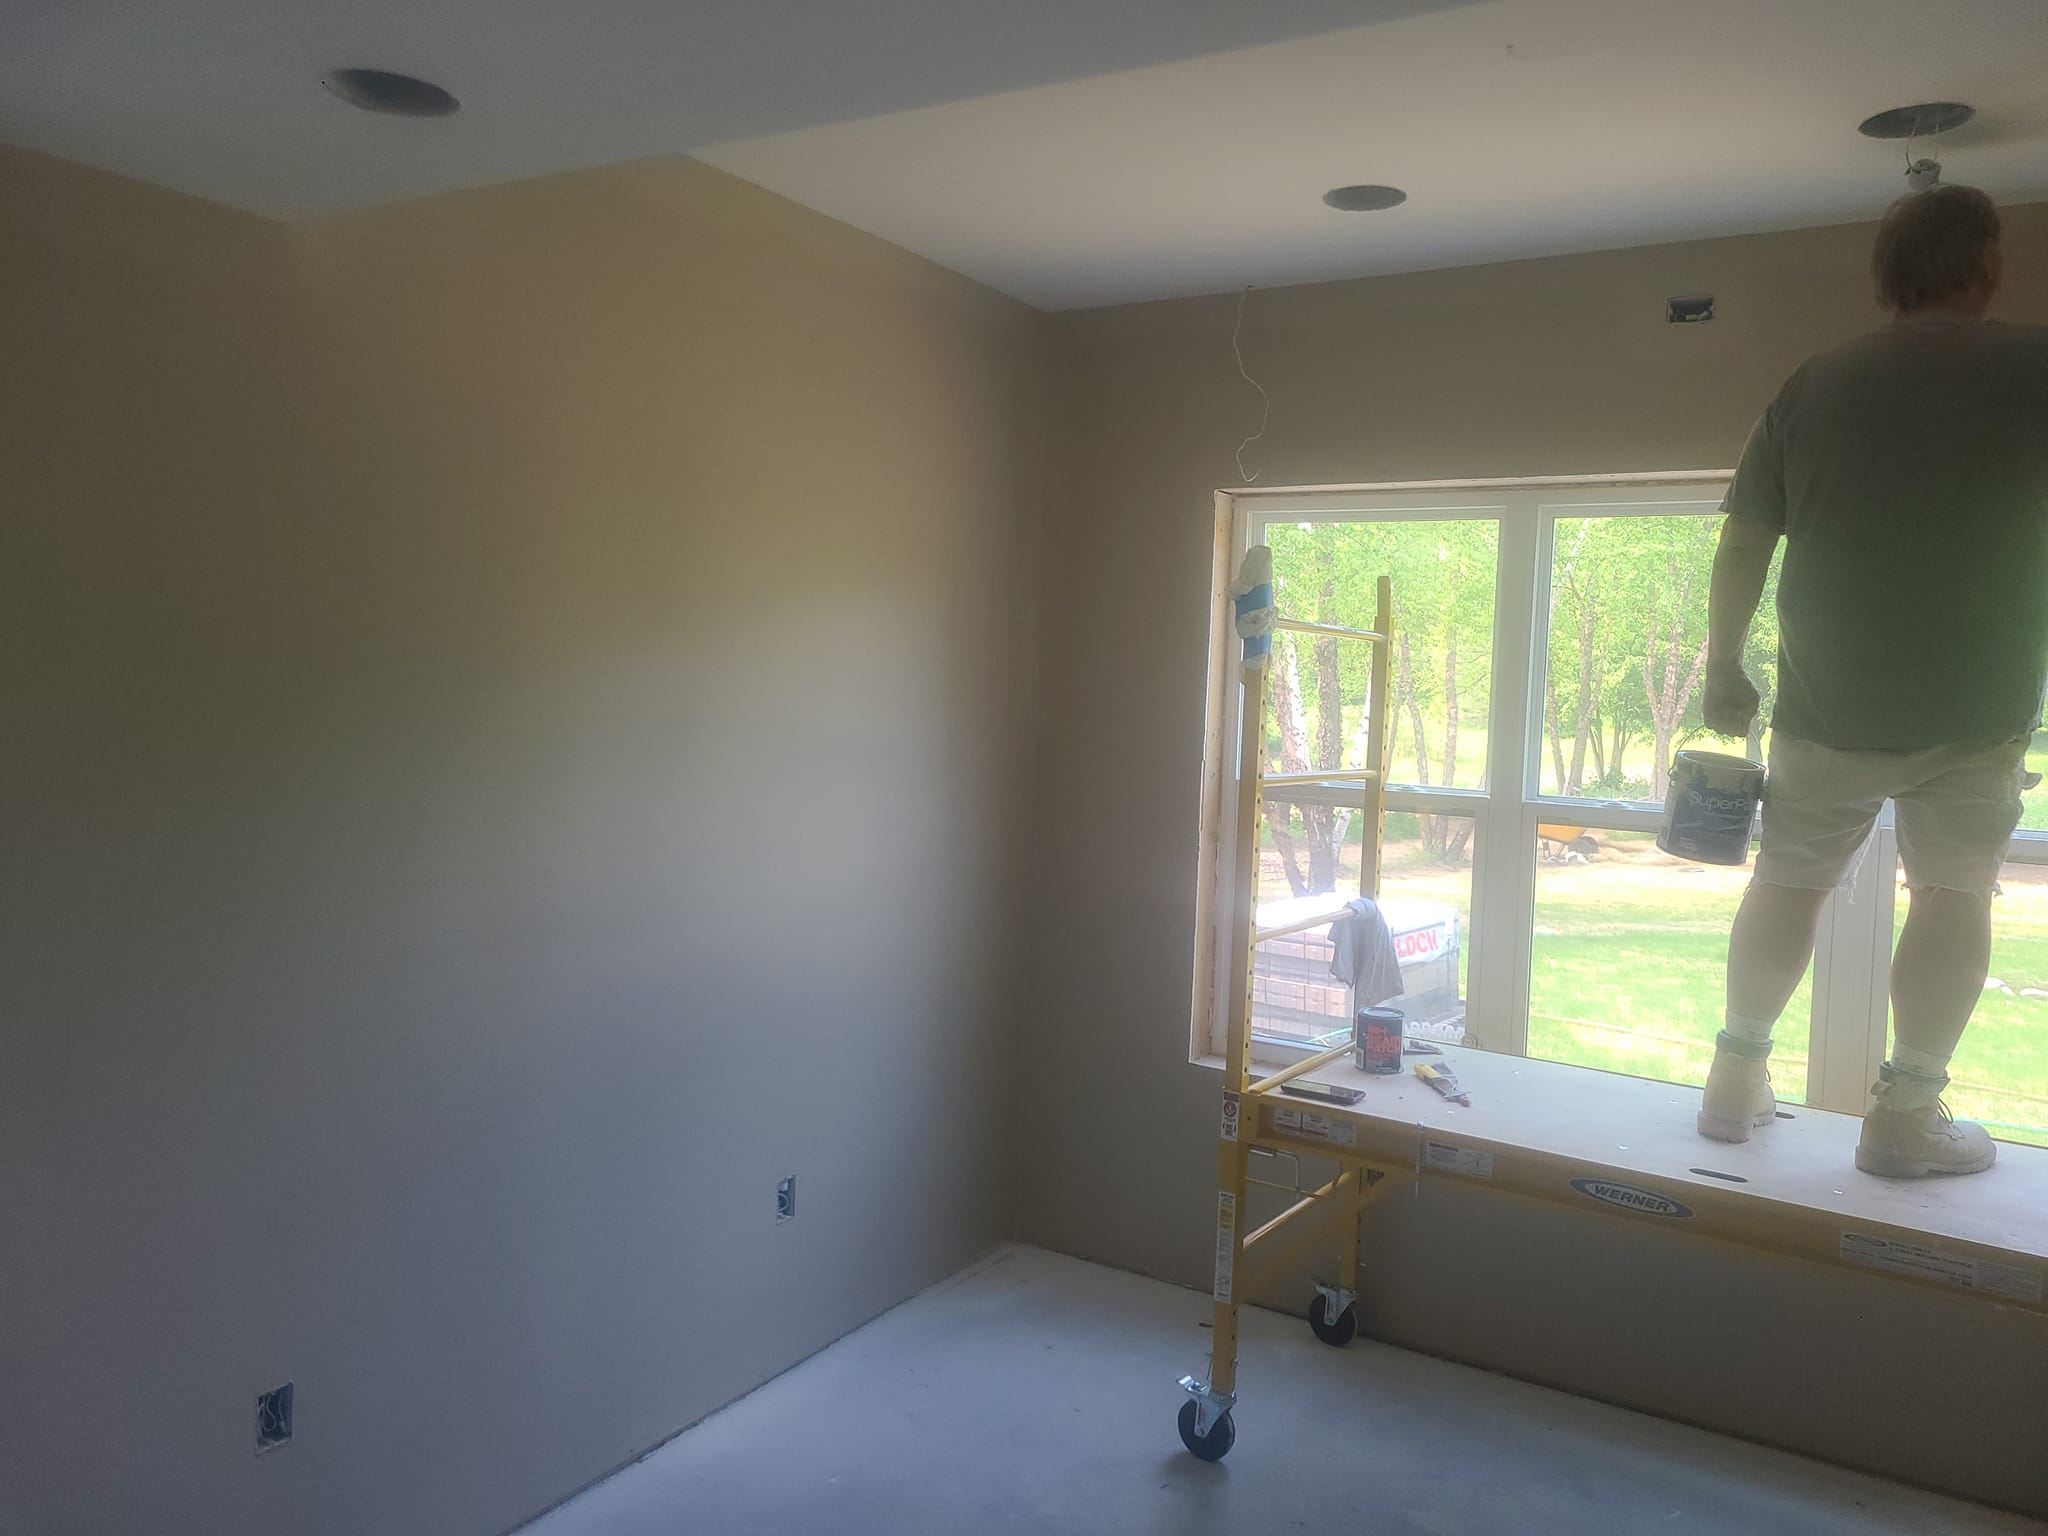 Ed & Sons Painting & Drywall